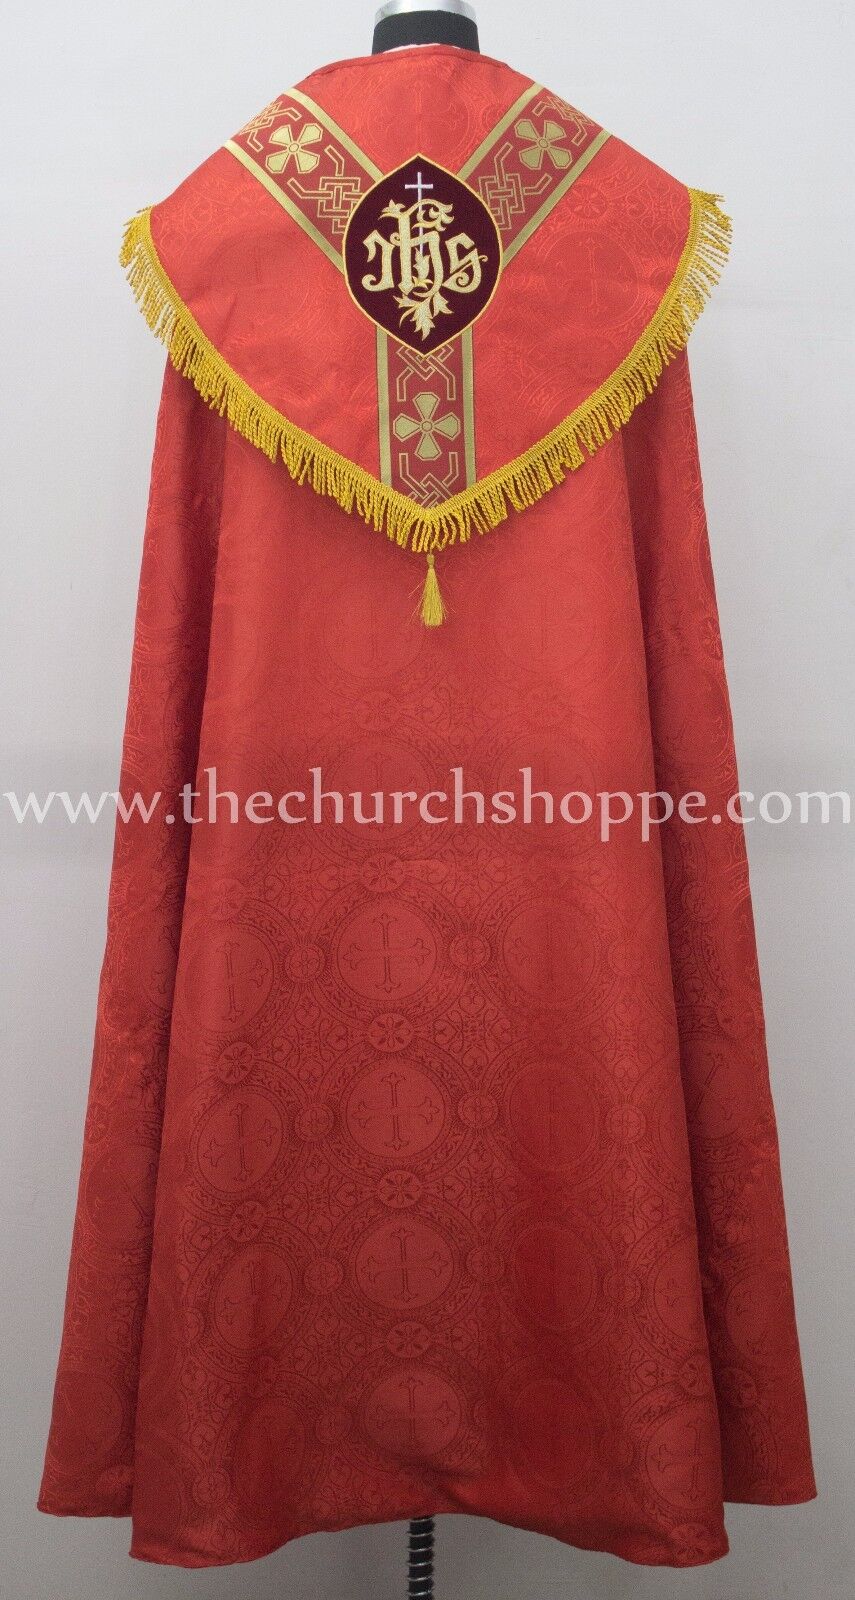 NEW Red Cope & Stole Set with IHS embroidery,capa pluvial,chape,far fronte